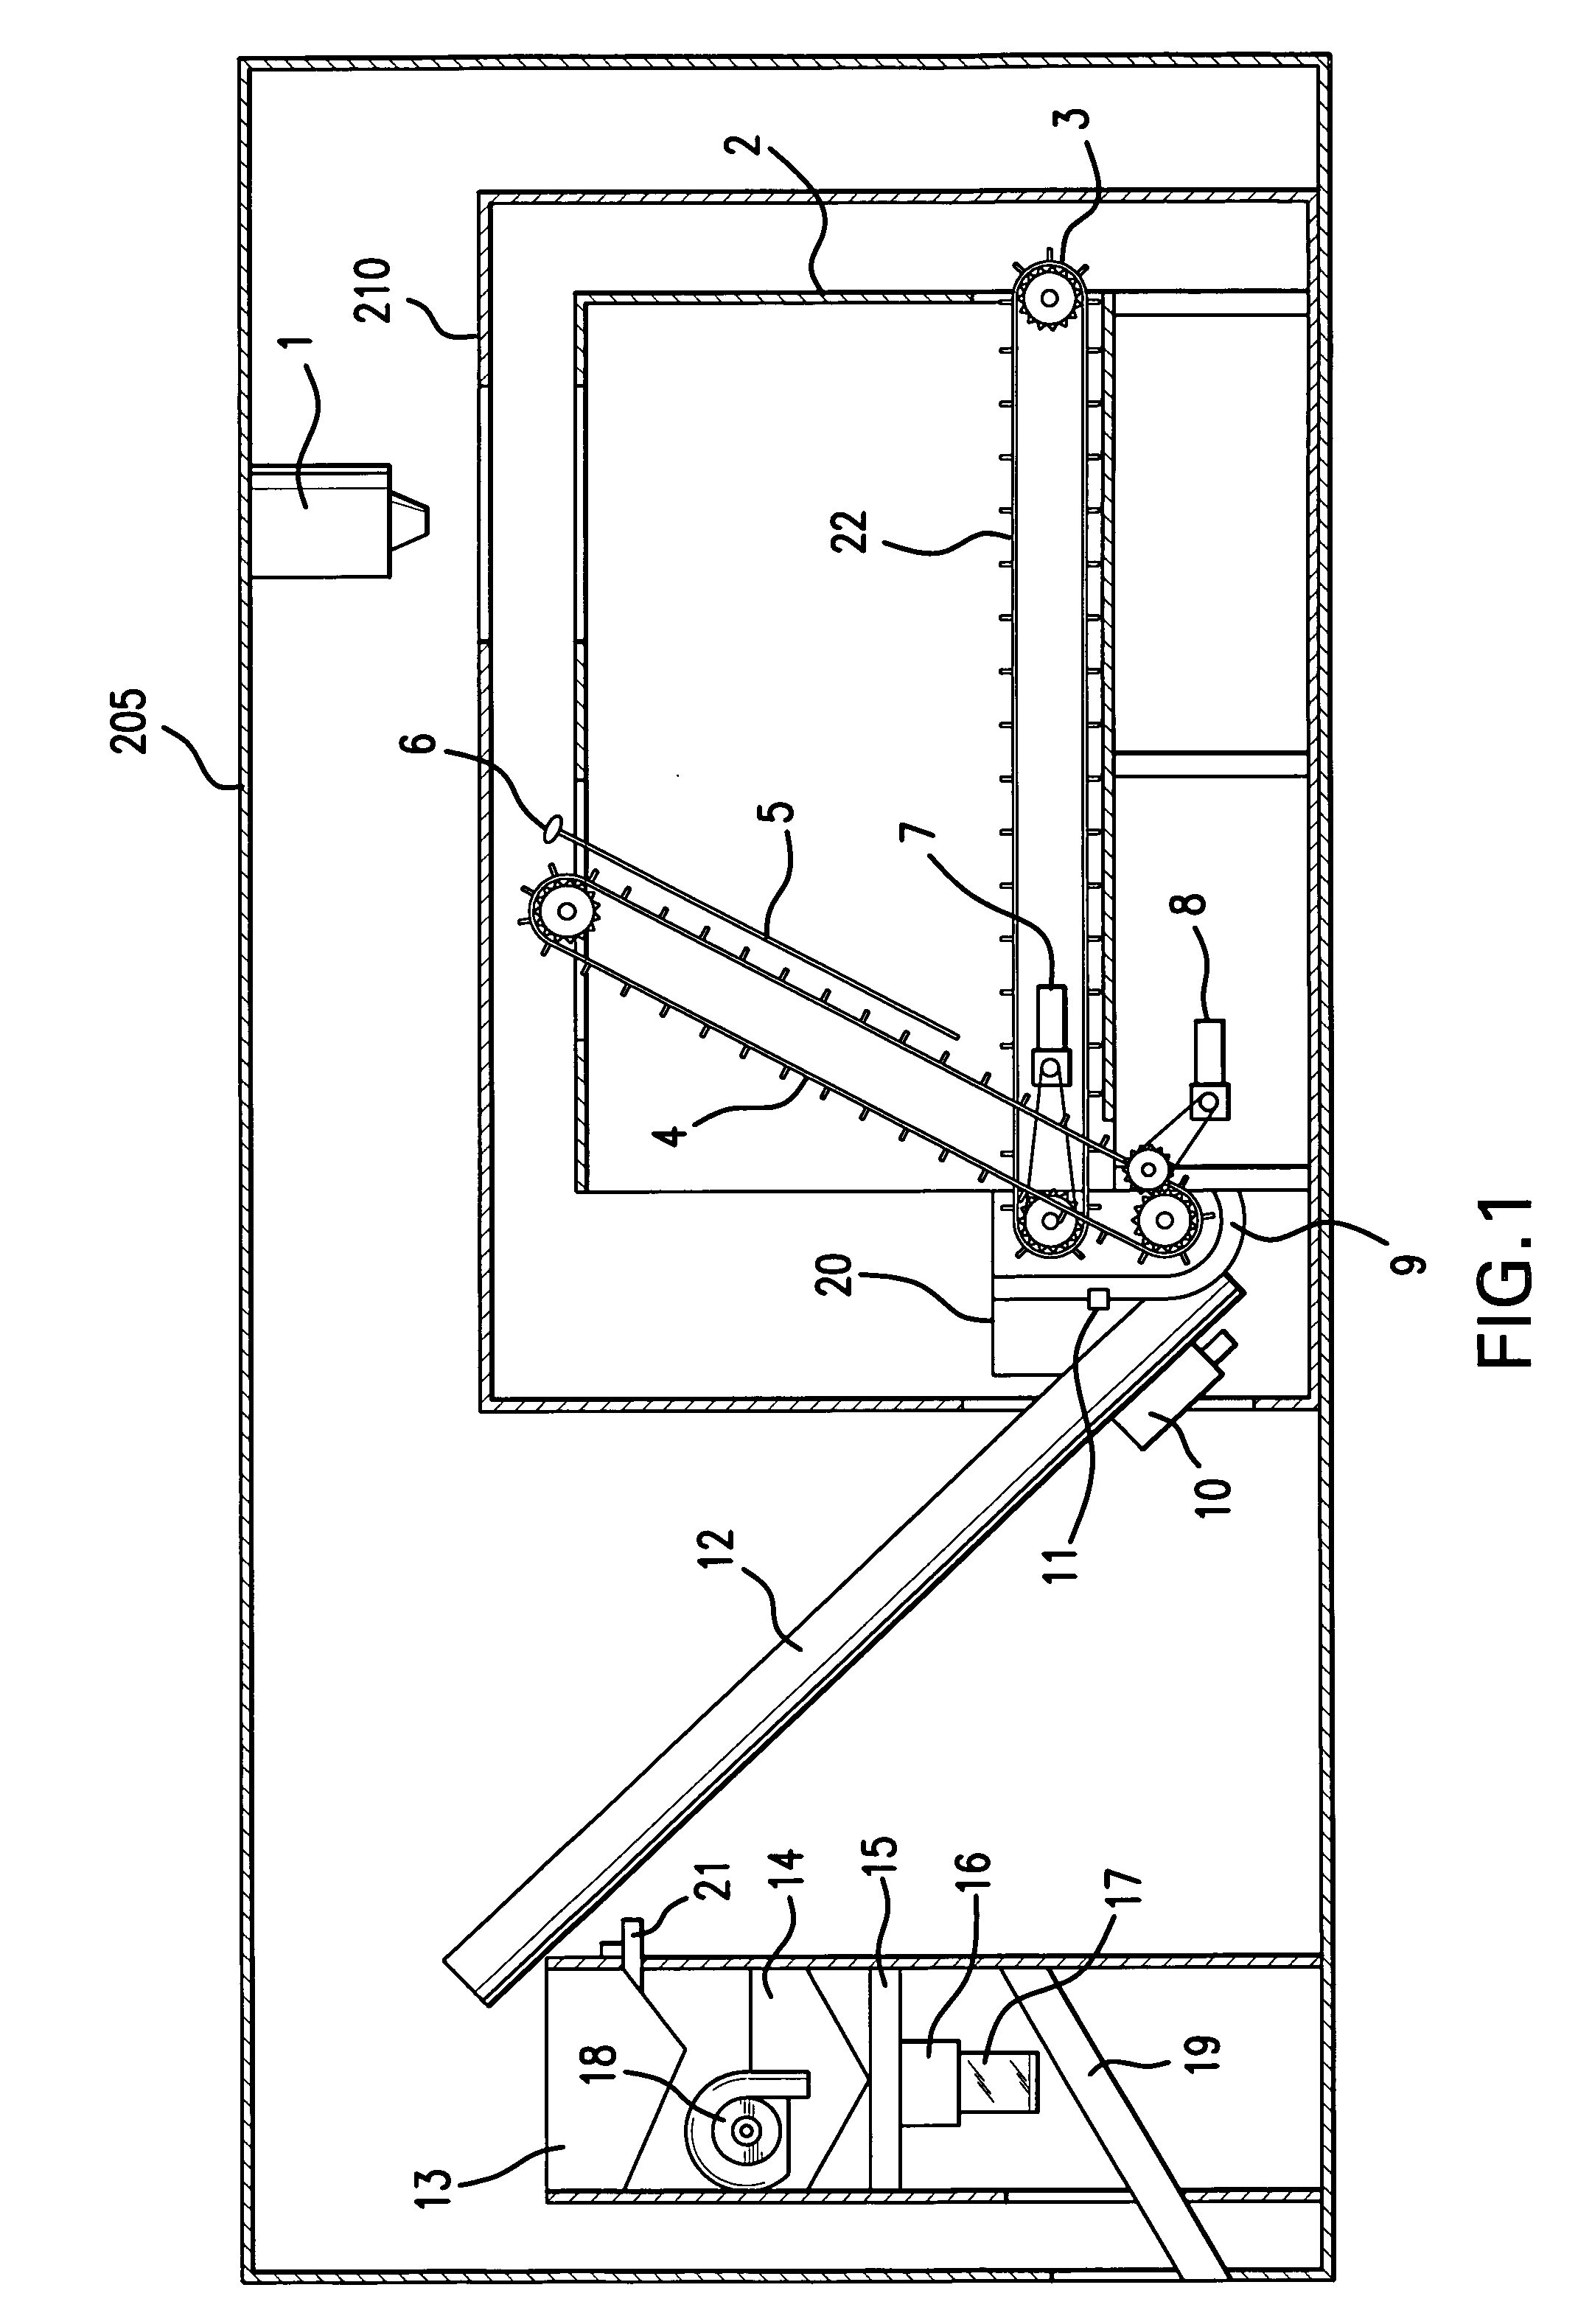 Automated ice bagging apparatus and methods